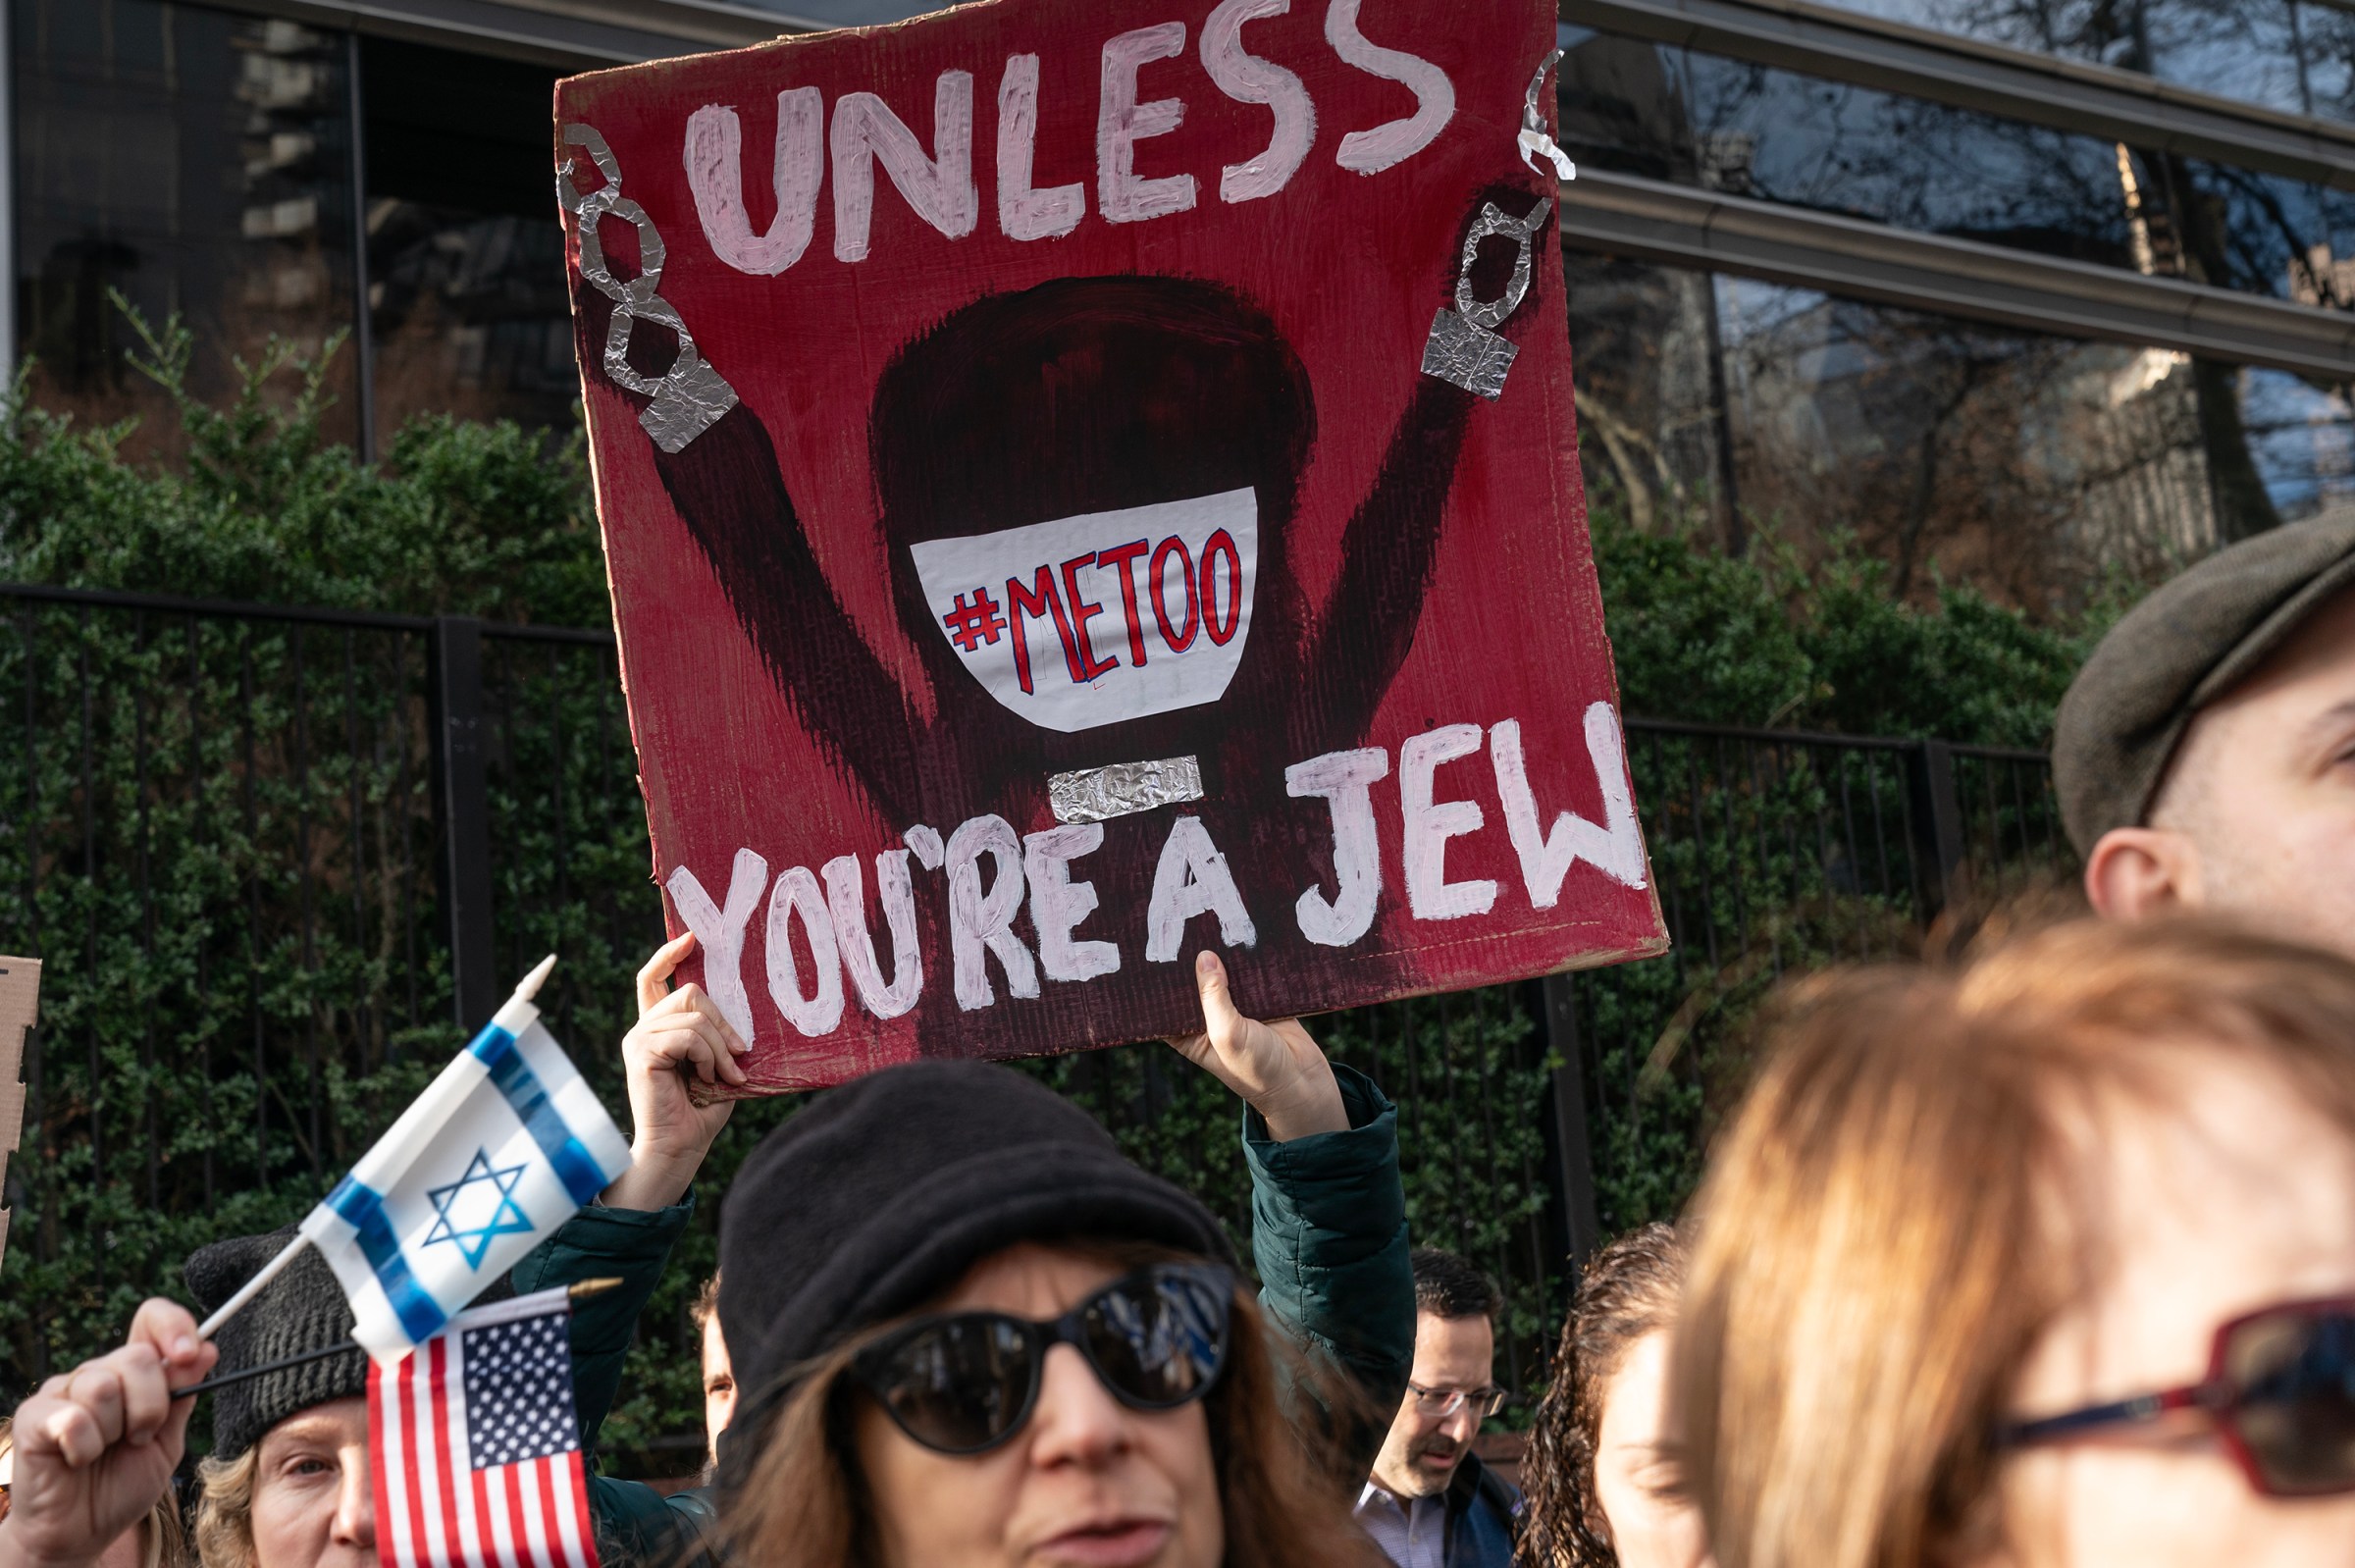 An activist in a swarm of people holds a sign that says “#MeToo unless you’re a Jew.”